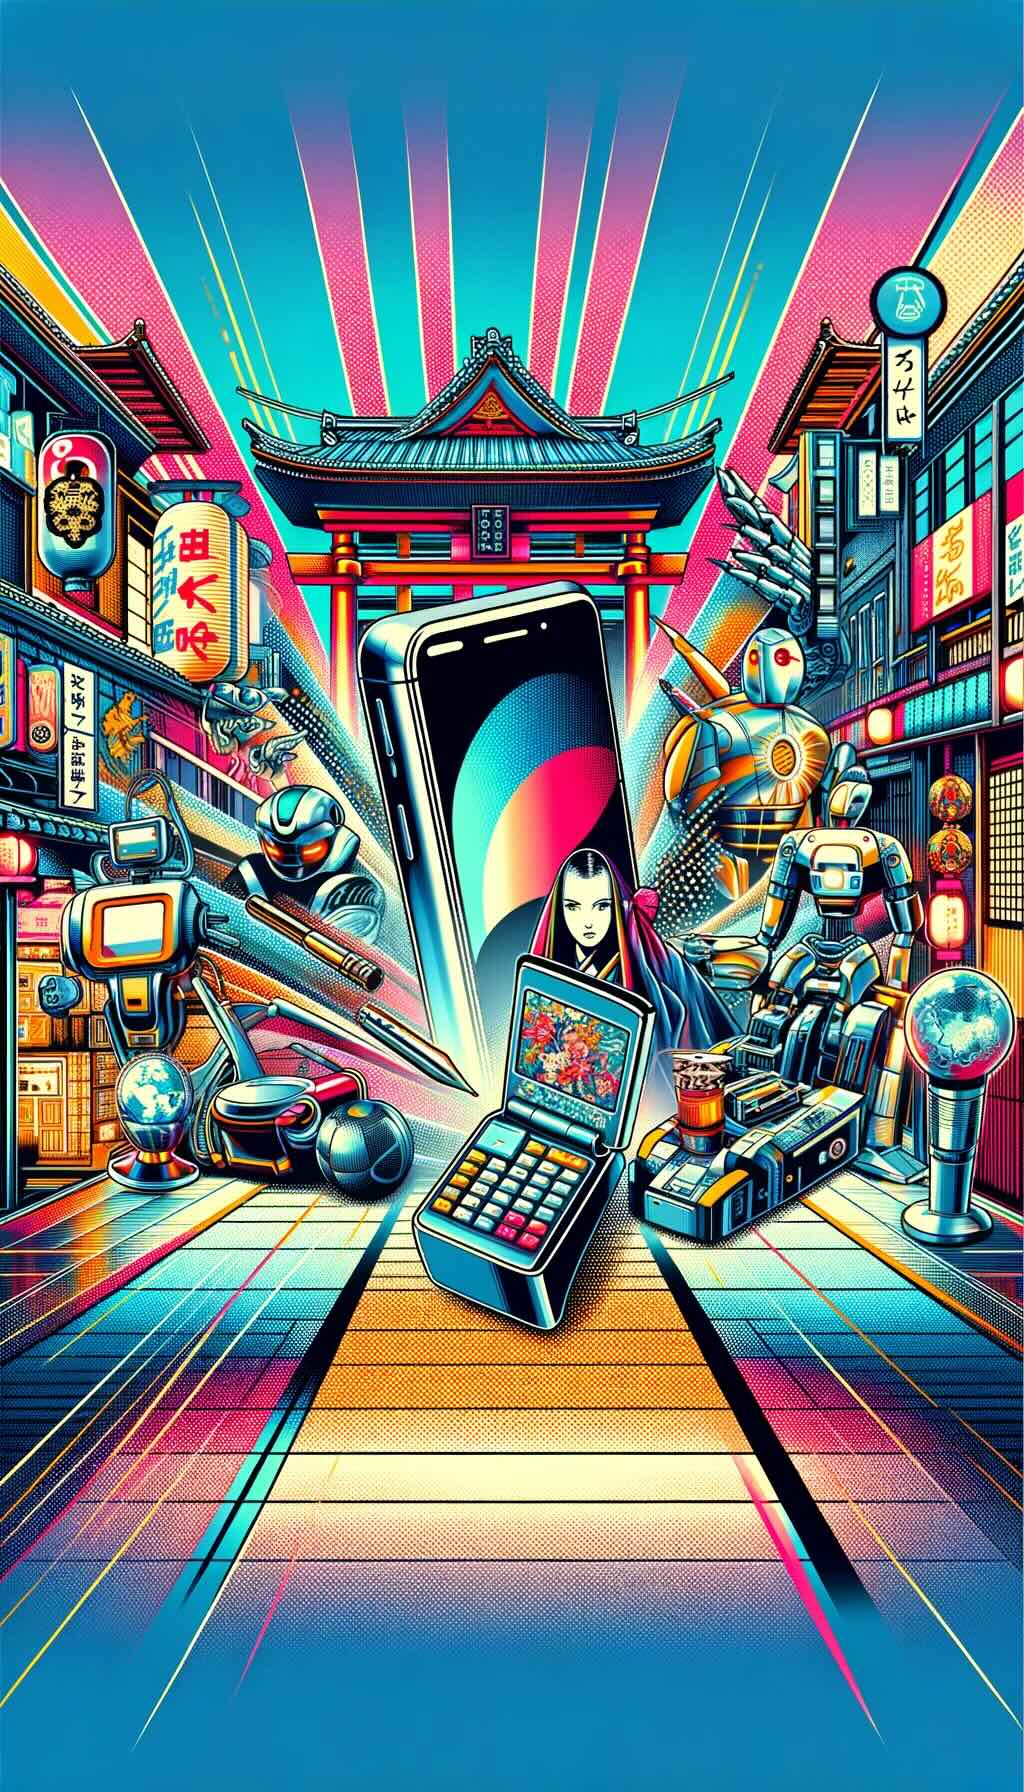 Global significance of Japanese electronics and gadgets features iconic Japanese electronic items like sleek smartphones and advanced robotics, portraying them as cultural ambassadors that blend traditional Japanese aesthetics with futuristic innovation. The background evokes the high-tech corridors of Japan, with a vibrant mix of traditional Japanese motifs and futuristic elements, encapsulating the essence of the Japanese tech revolution